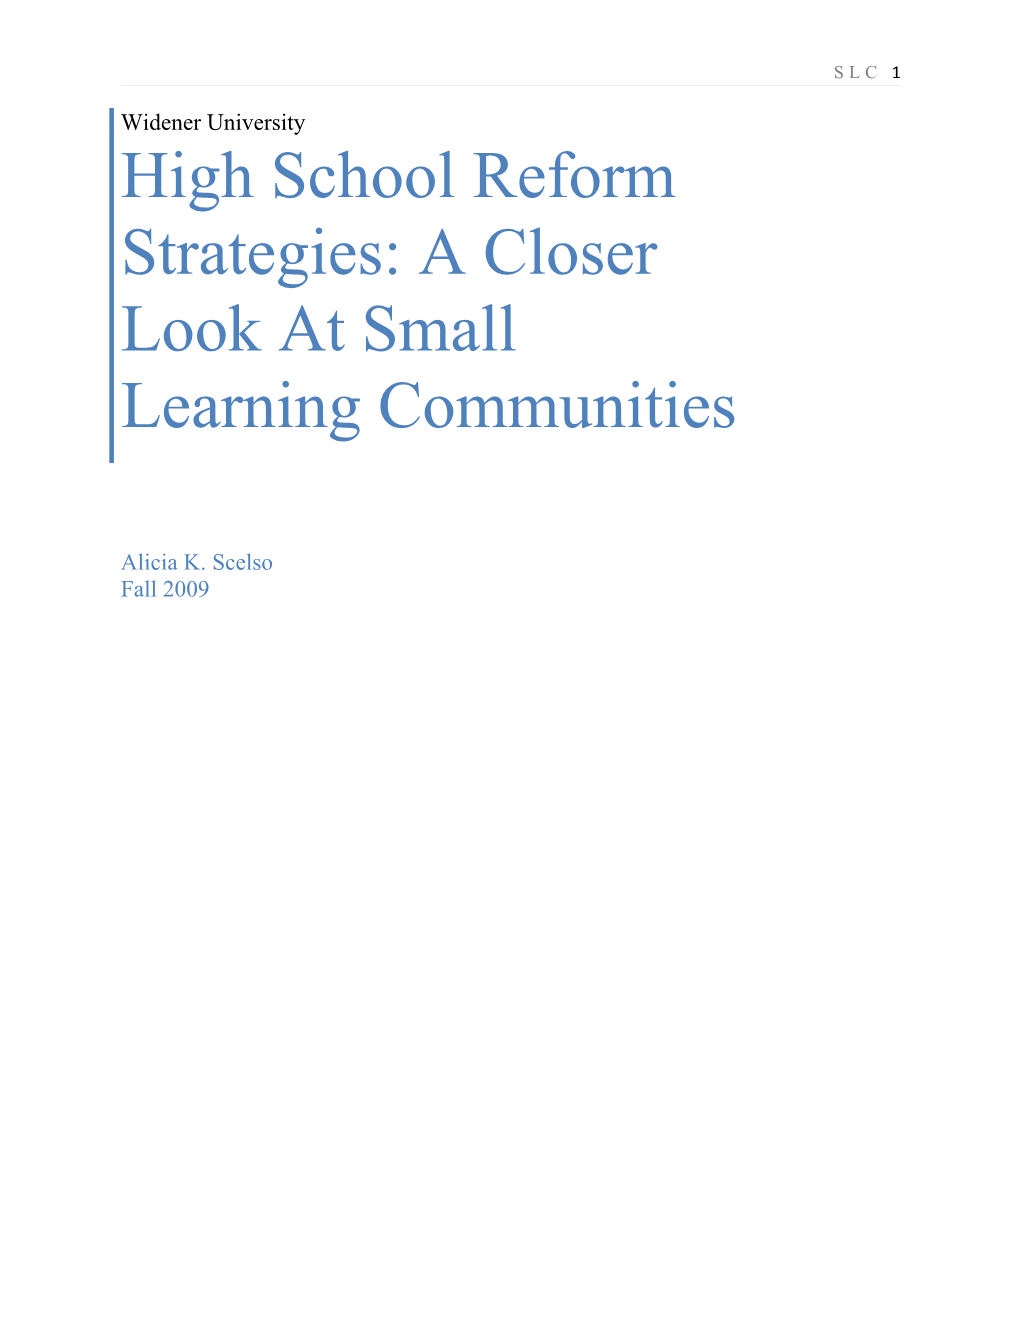 High School Reform Strategies: a Closer Look at Small Learning Communities